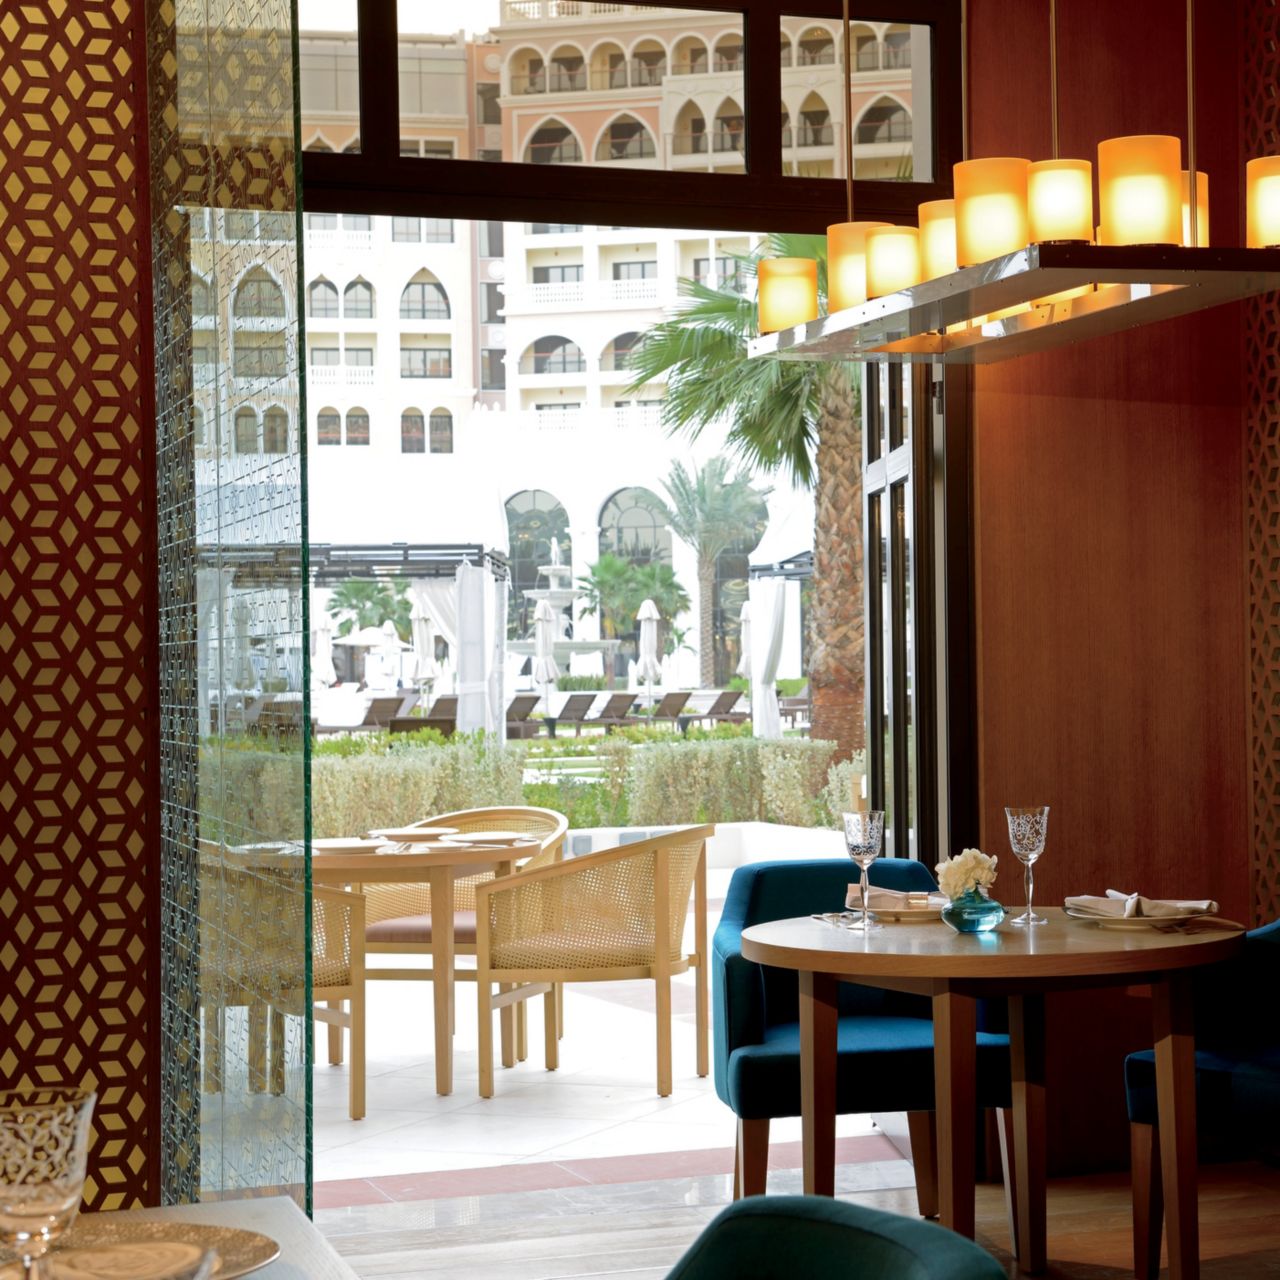 Table and outside terrace at Mijana restaurant at The Ritz-Carlton Abu Dhabi, Grand Canal